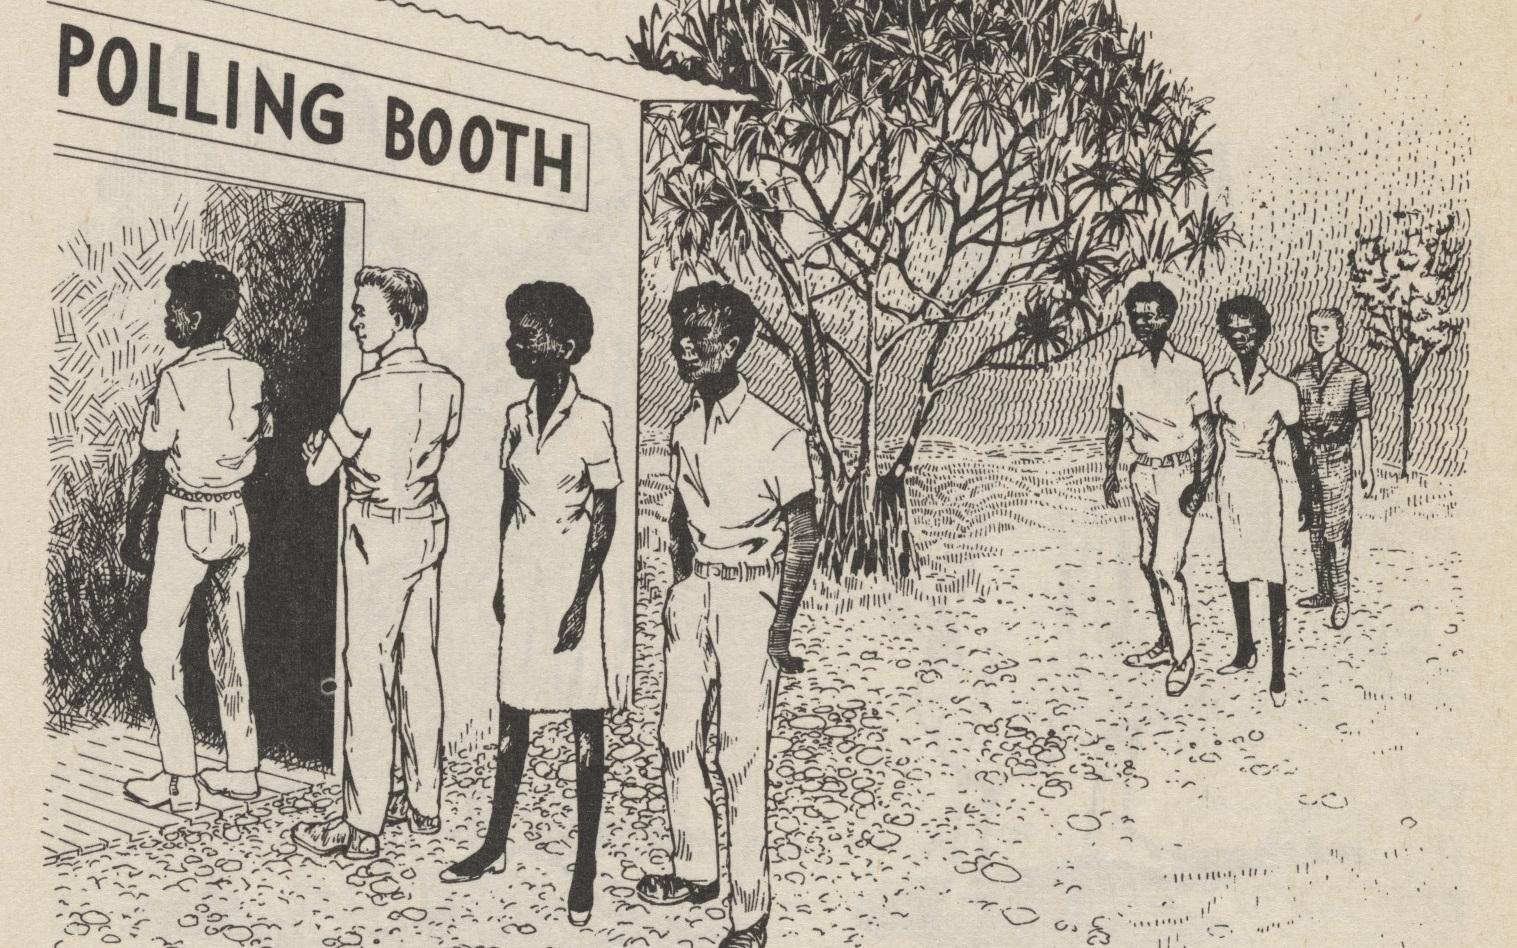 Illustration of people, including Aboriginal people, voting. Produced in 1970 by the Western Australian government in order to educate people (especially in remote communities) about voting.